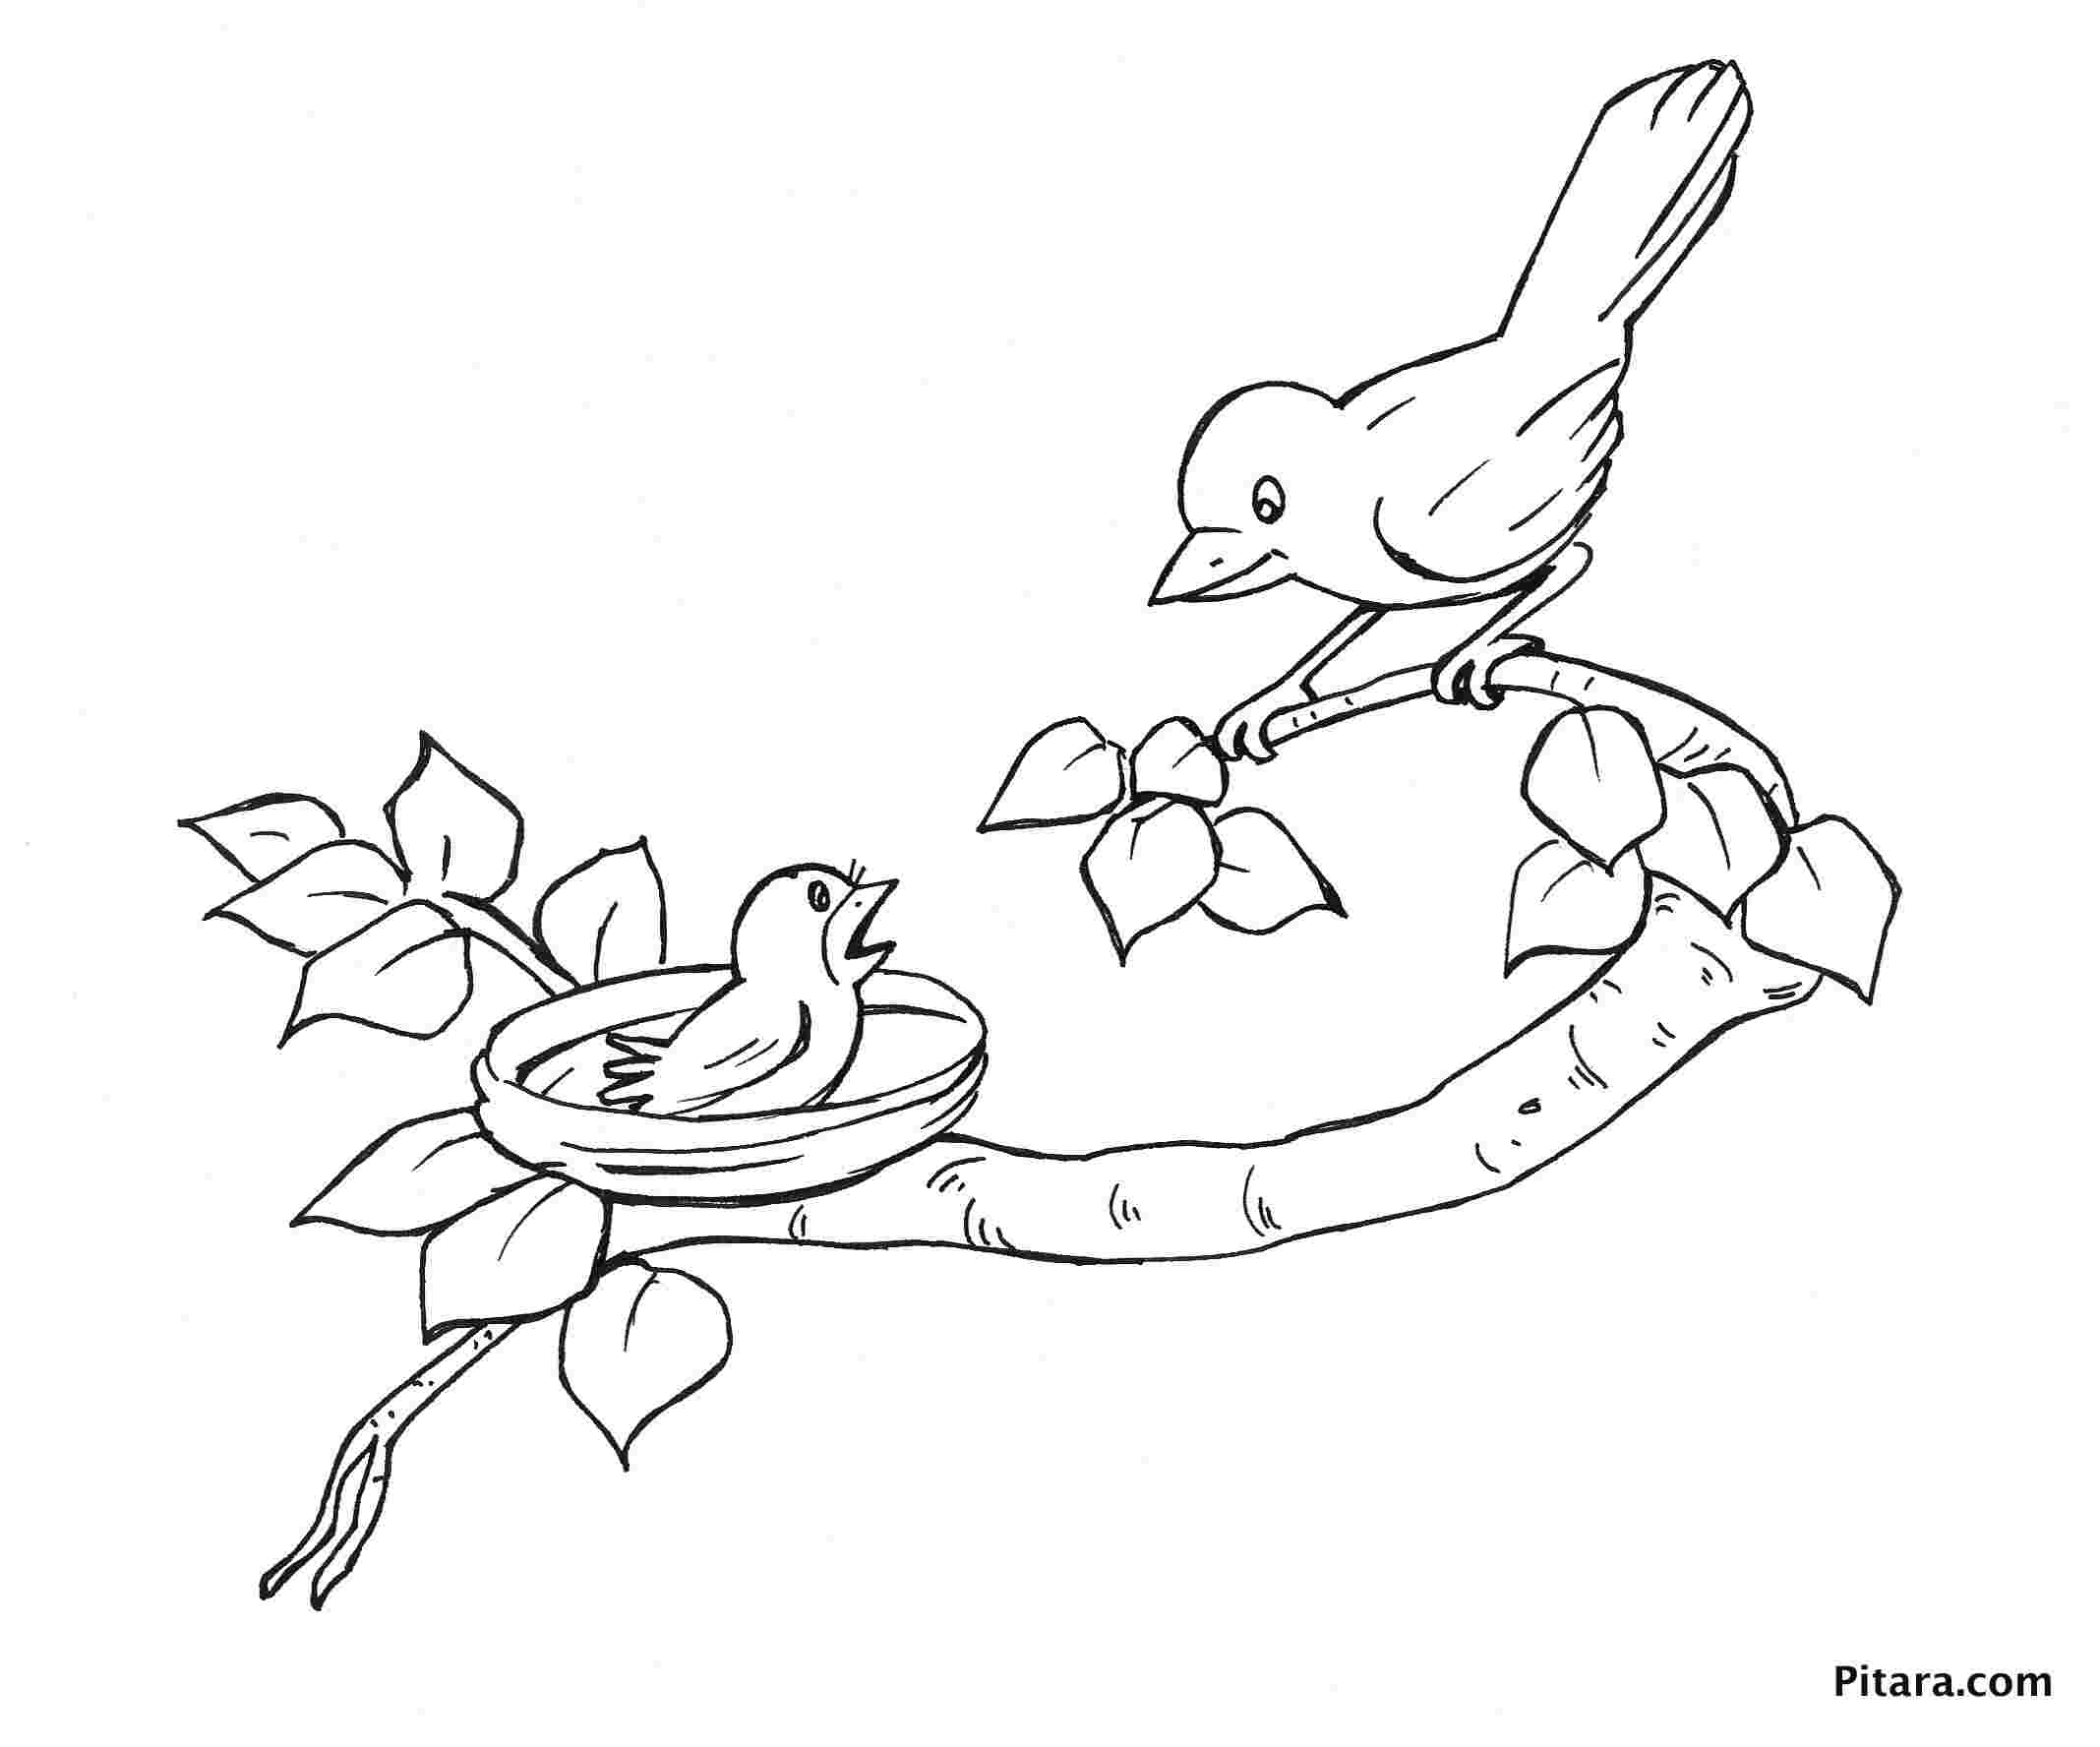 263 Simple Little Bird Coloring Pages for Kindergarten